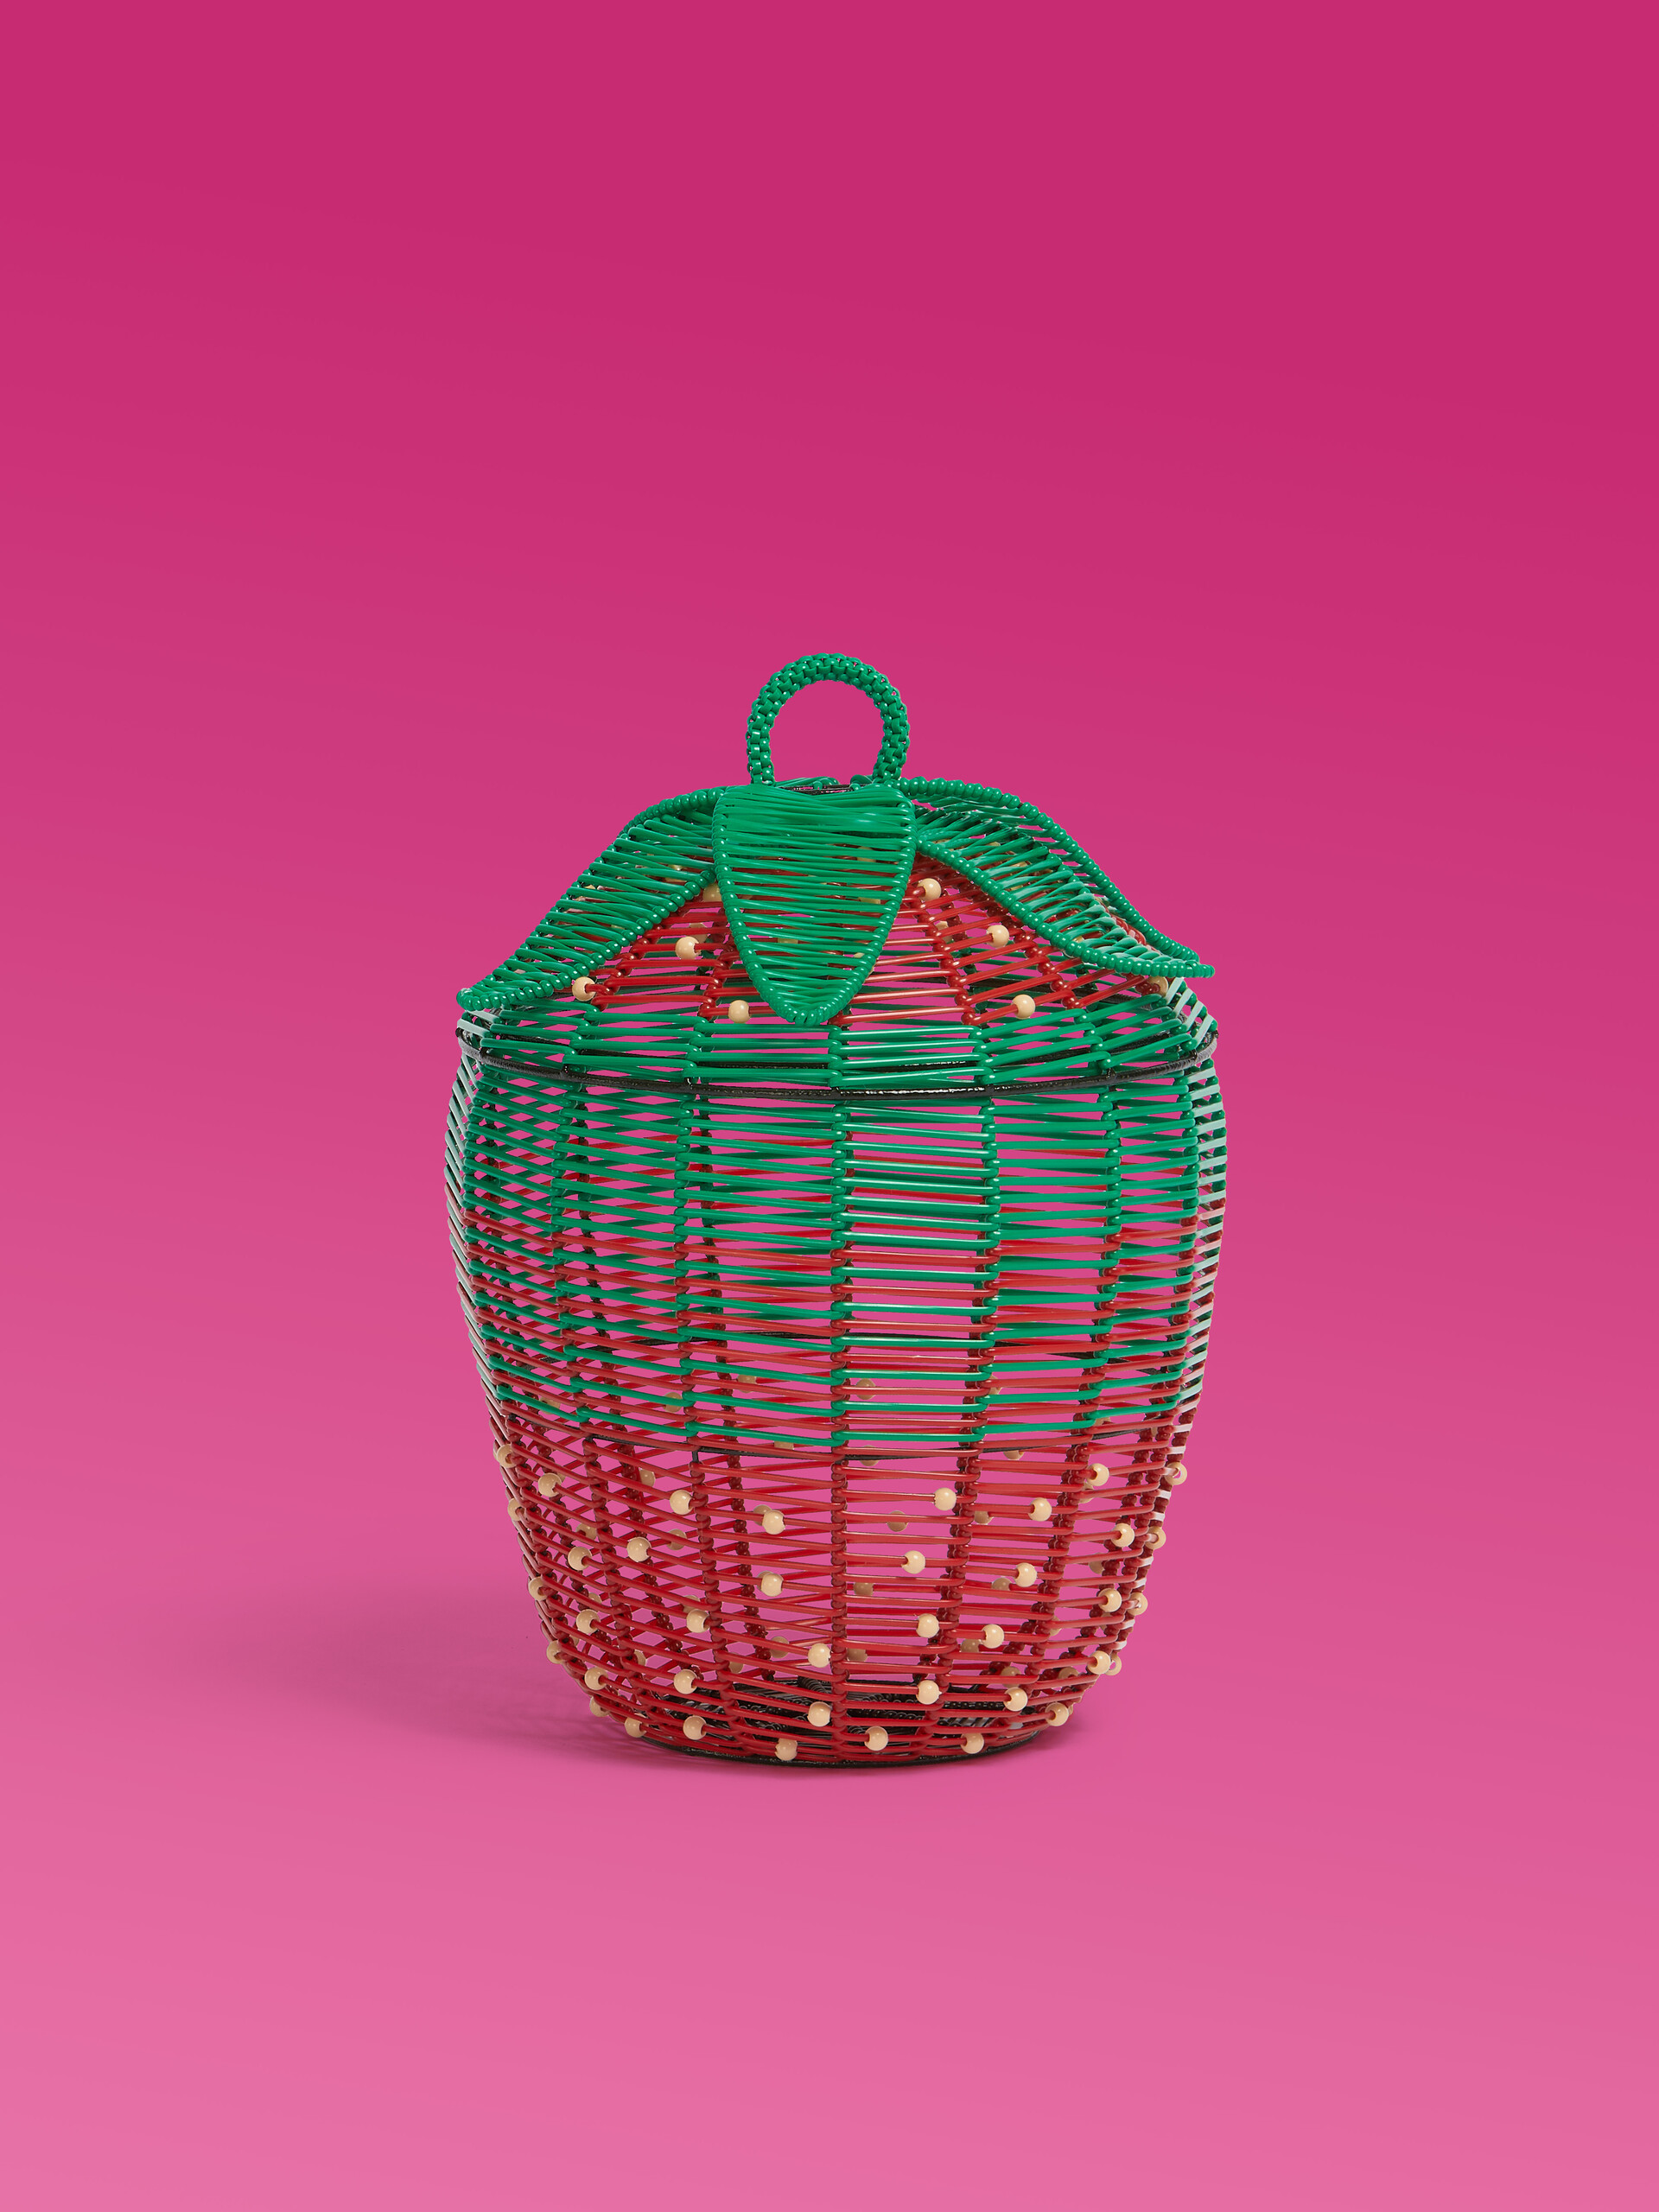 Red Marni Market Strawberry Basket - Accessories - Image 1